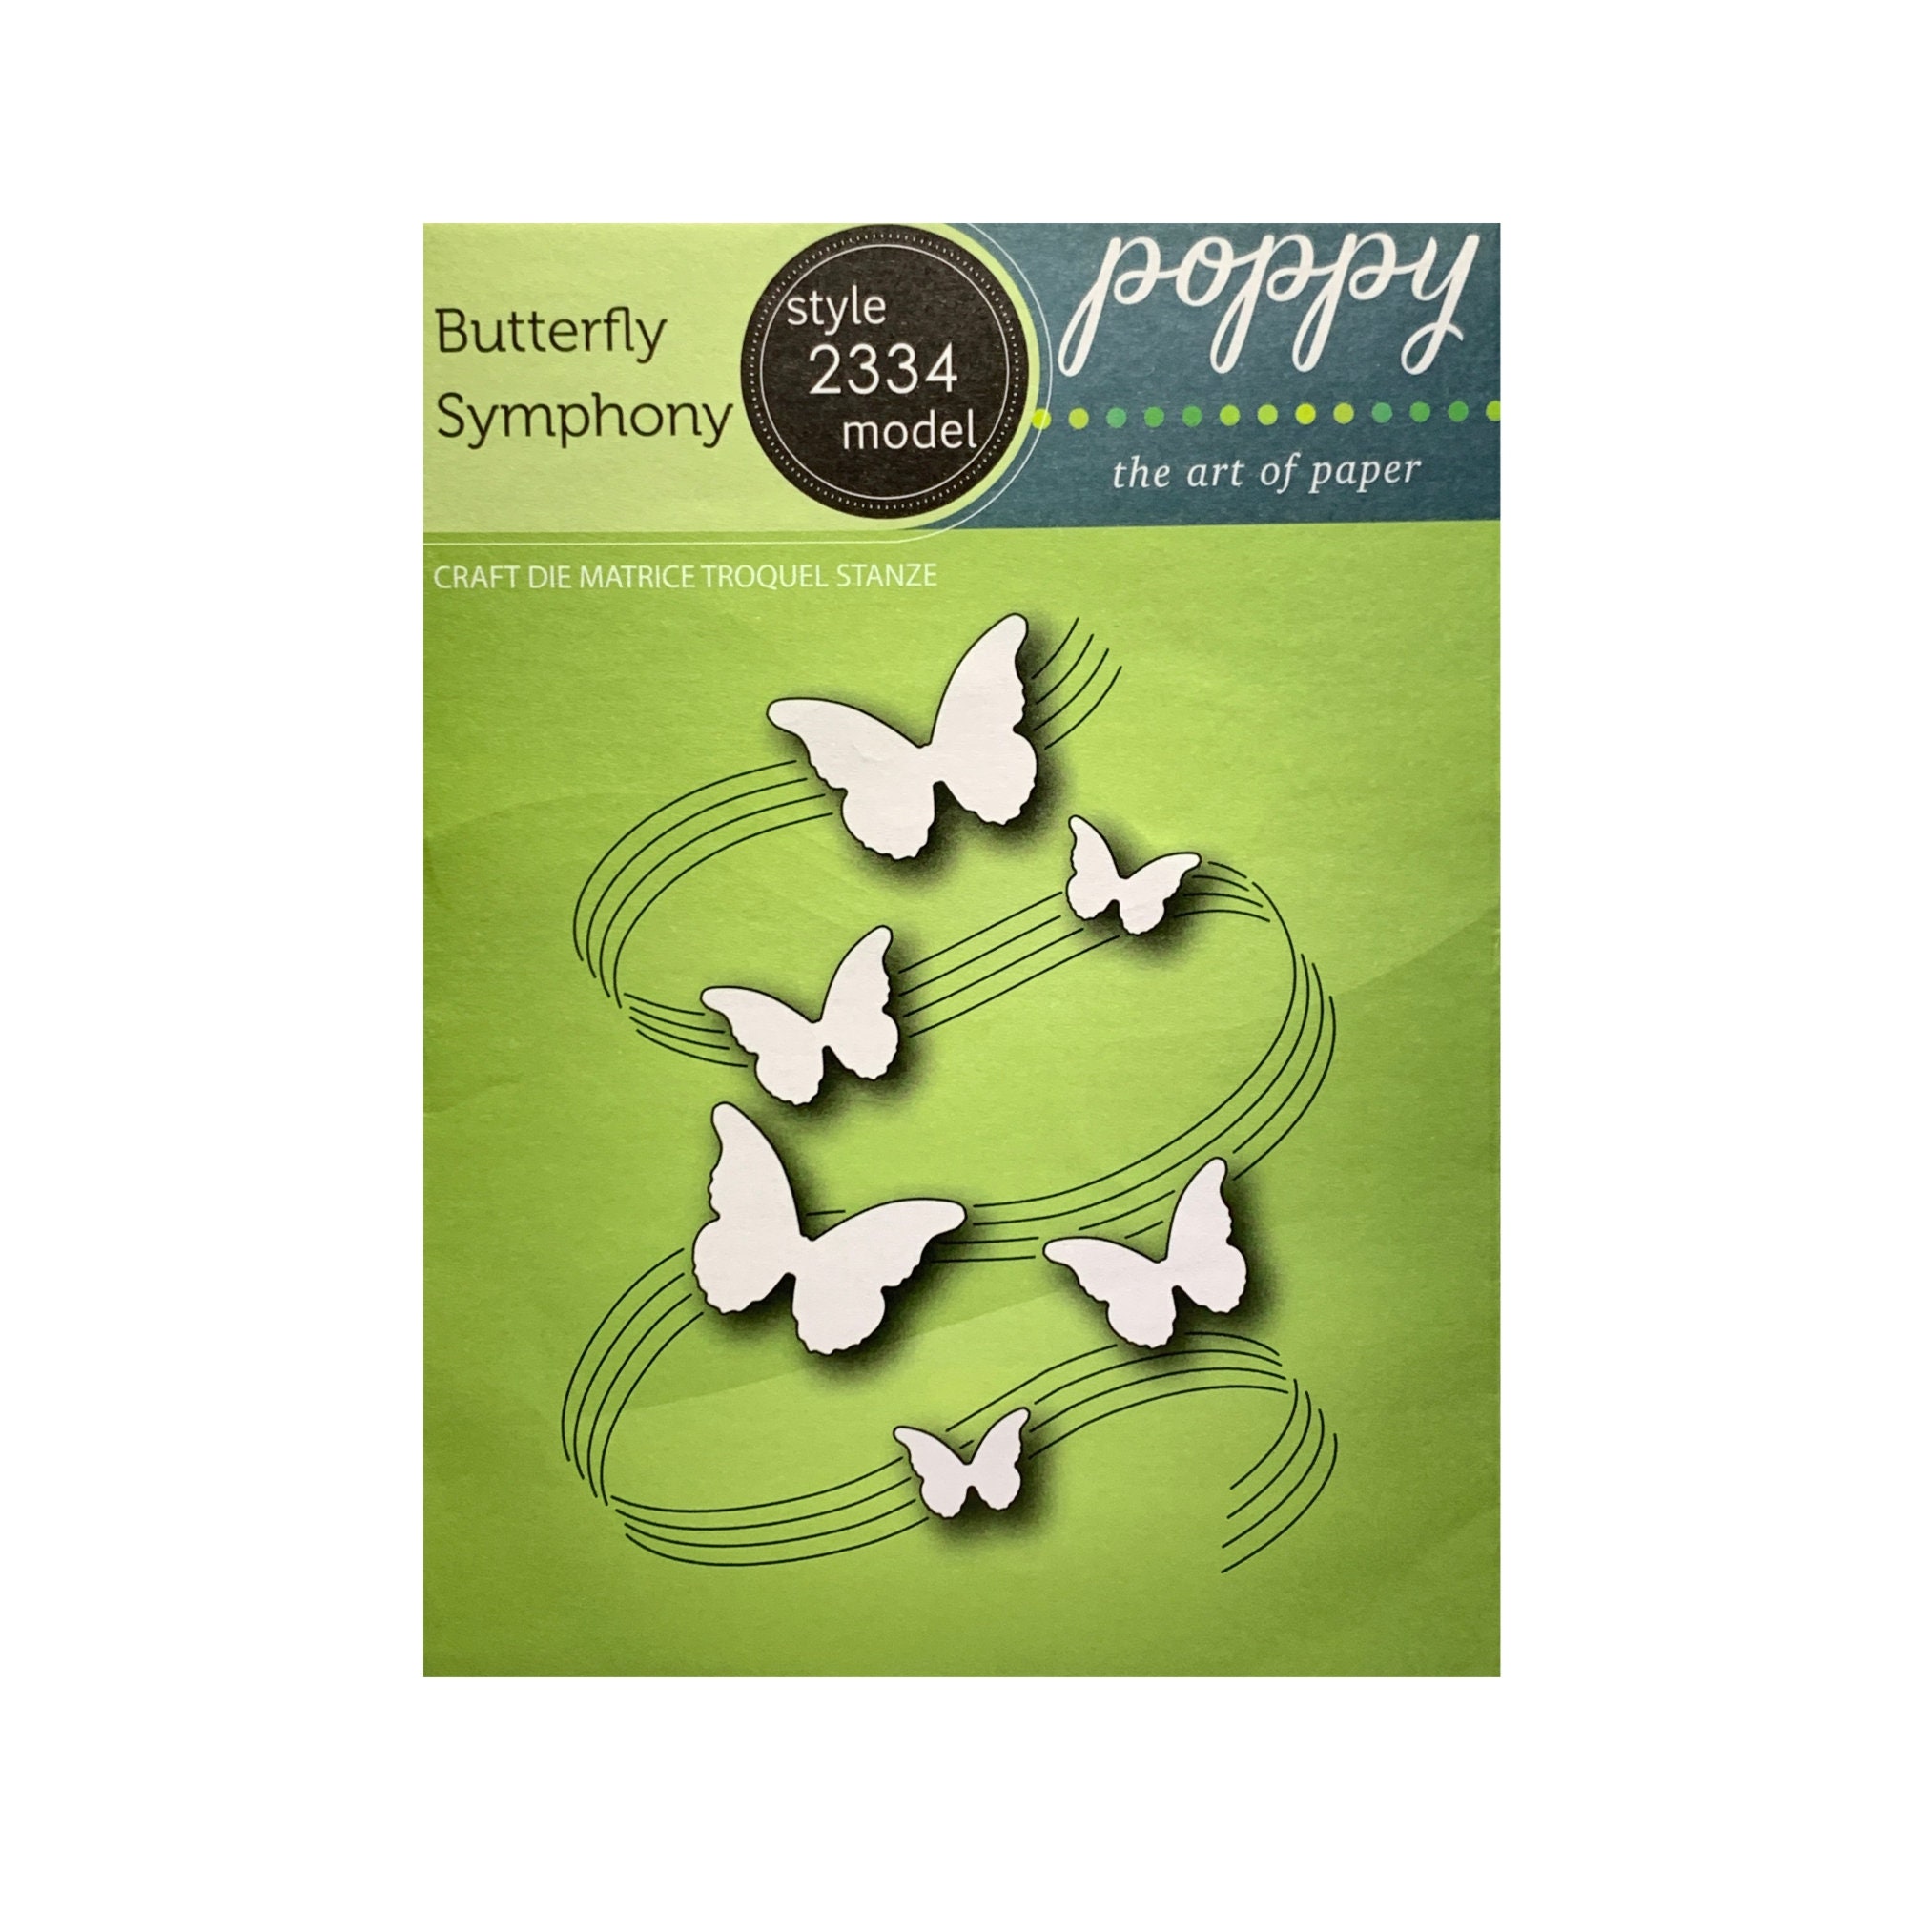 Butterfly Symphony Metal Die Cut Poppystamps Craft Cutting Etsy